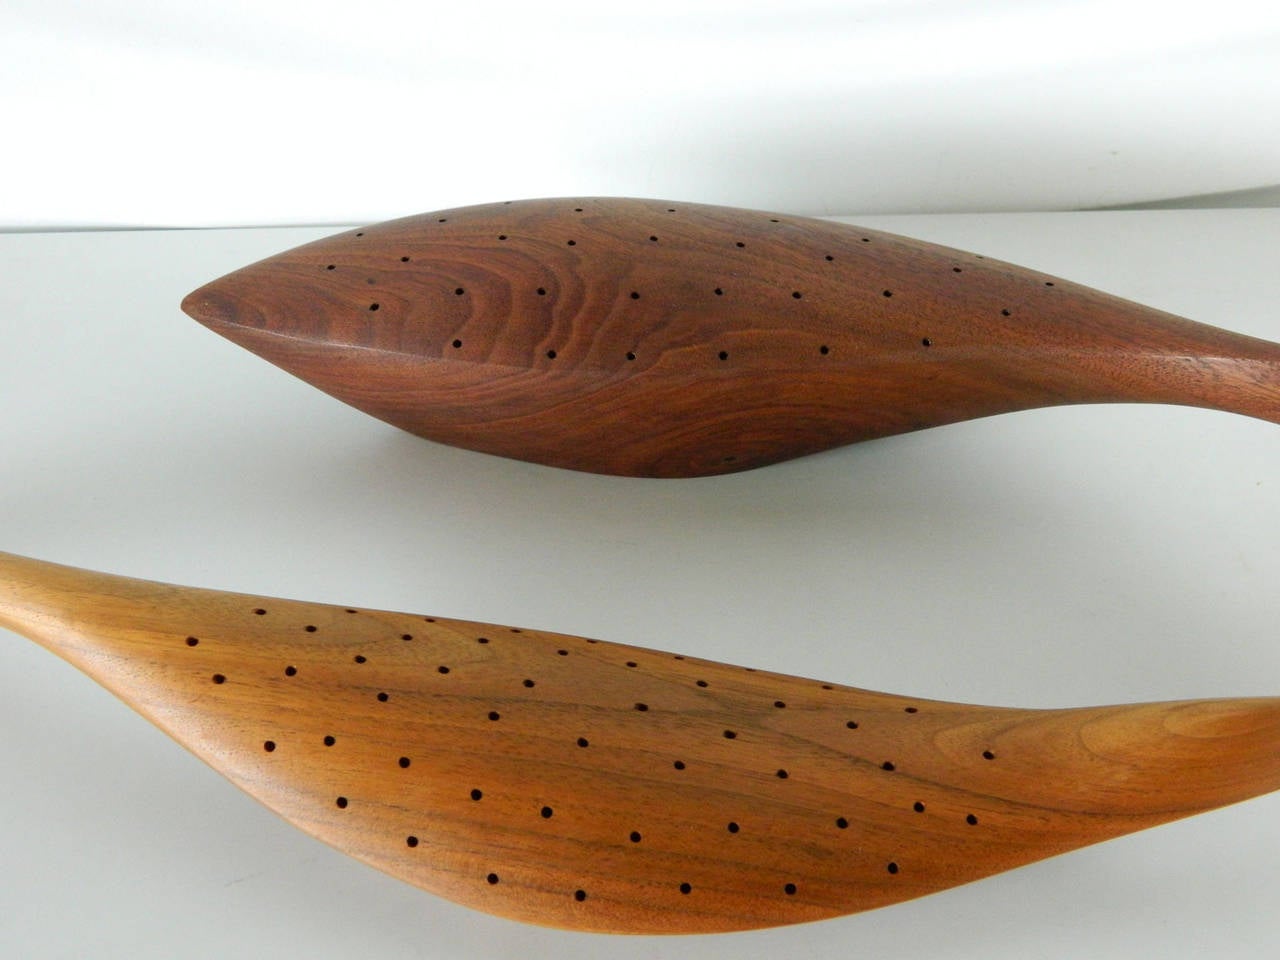 American-born Emil Milan (1922-1985) was a trained sculptor and woodworker. He created stunning bowls, plates and spoons as well as figural objects. These two canape holders in the shape of a bird and fish combine Milan's philosophy of combining the